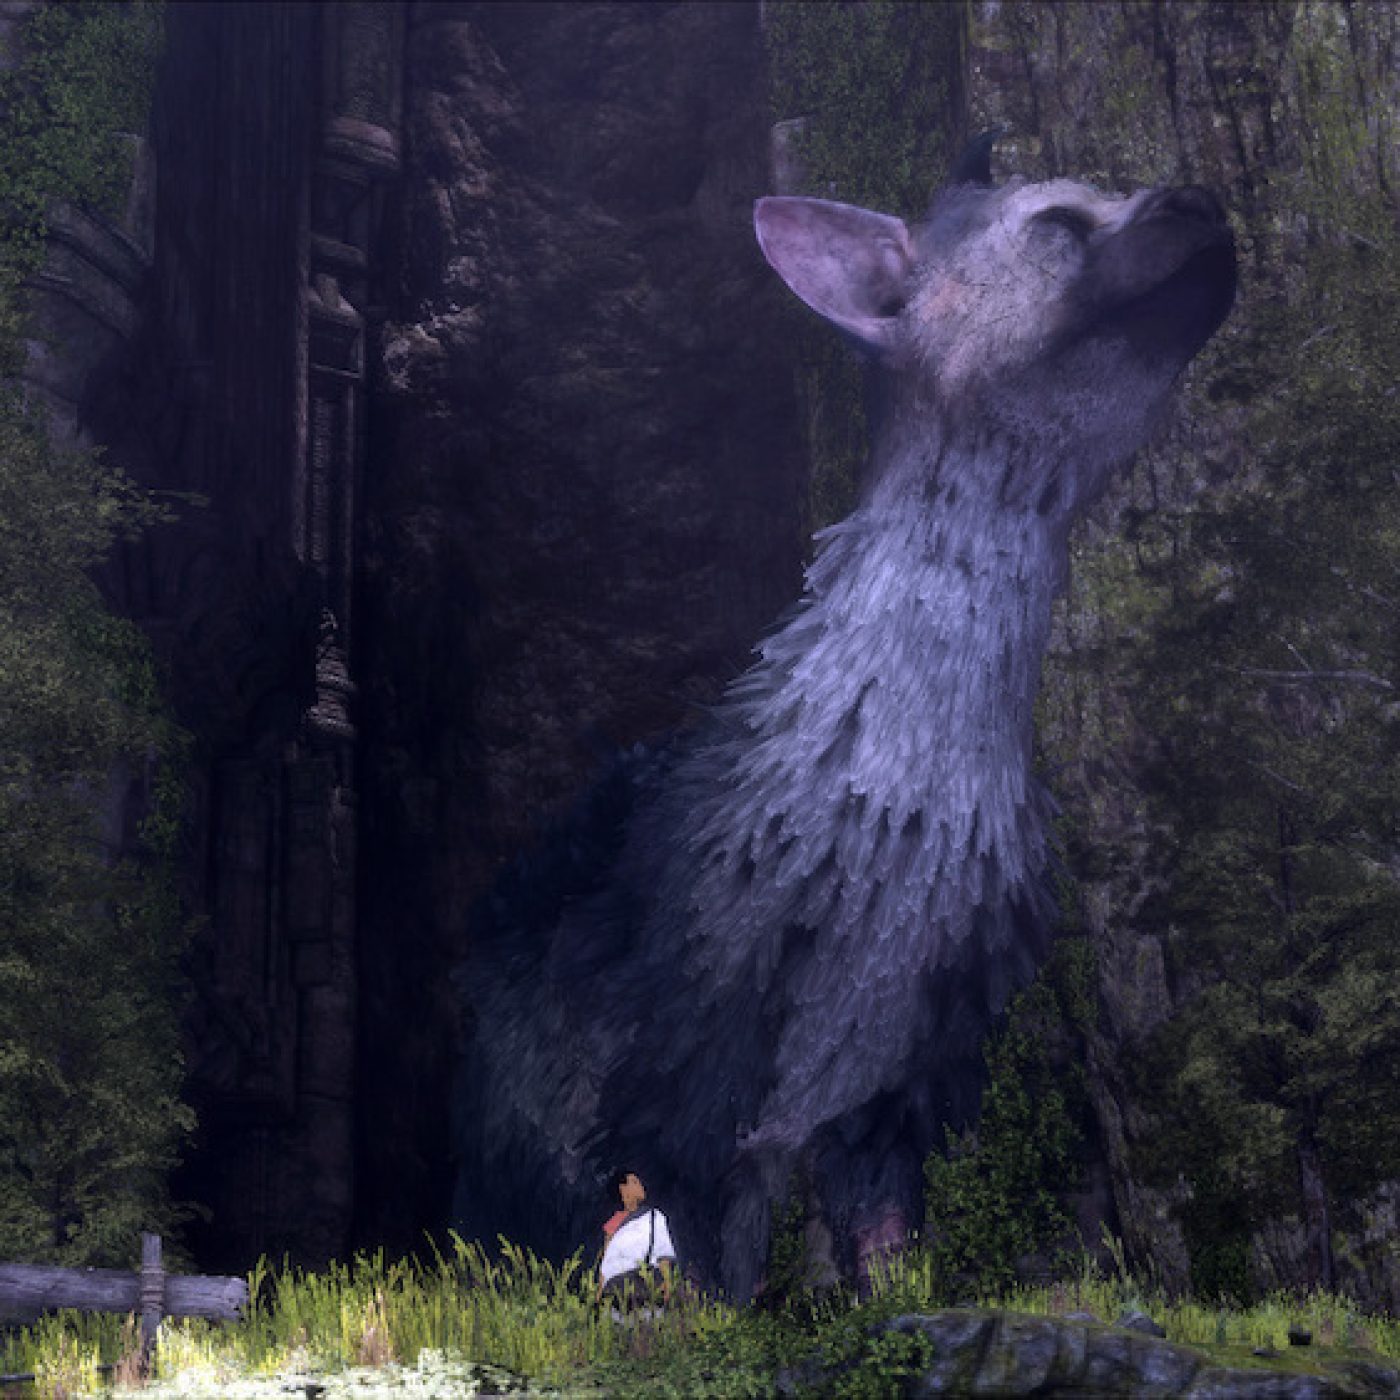 The Last Guardian lives, and it's coming to PS4 in 2016